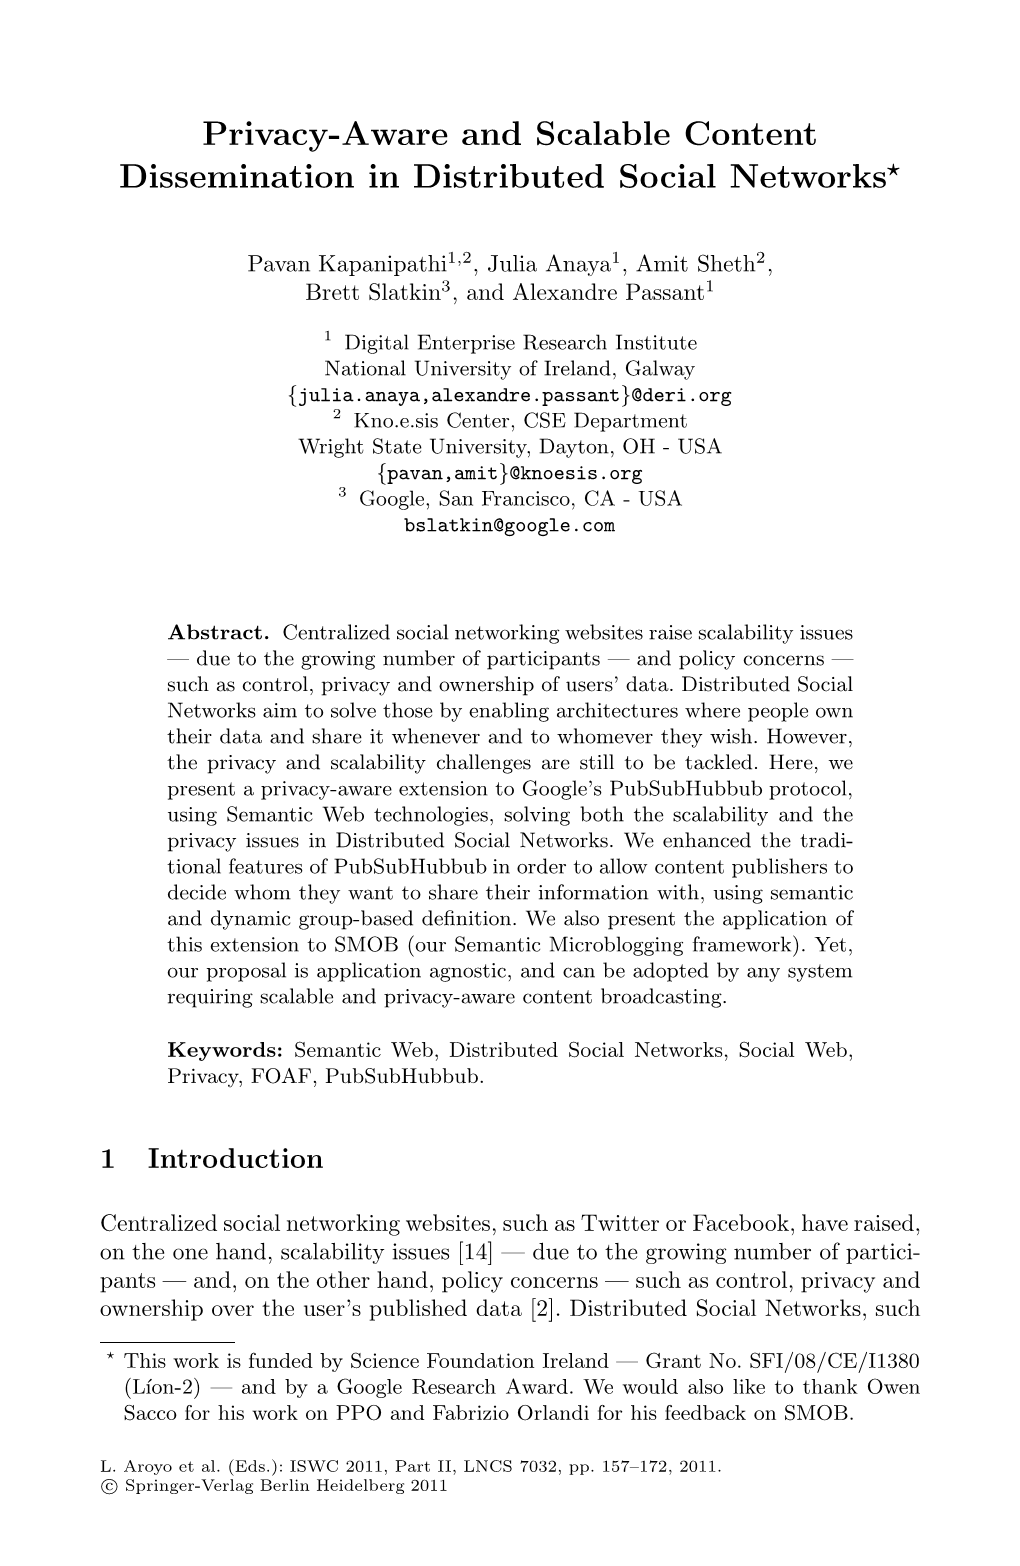 Privacy-Aware and Scalable Content Dissemination in Distributed Social Networks